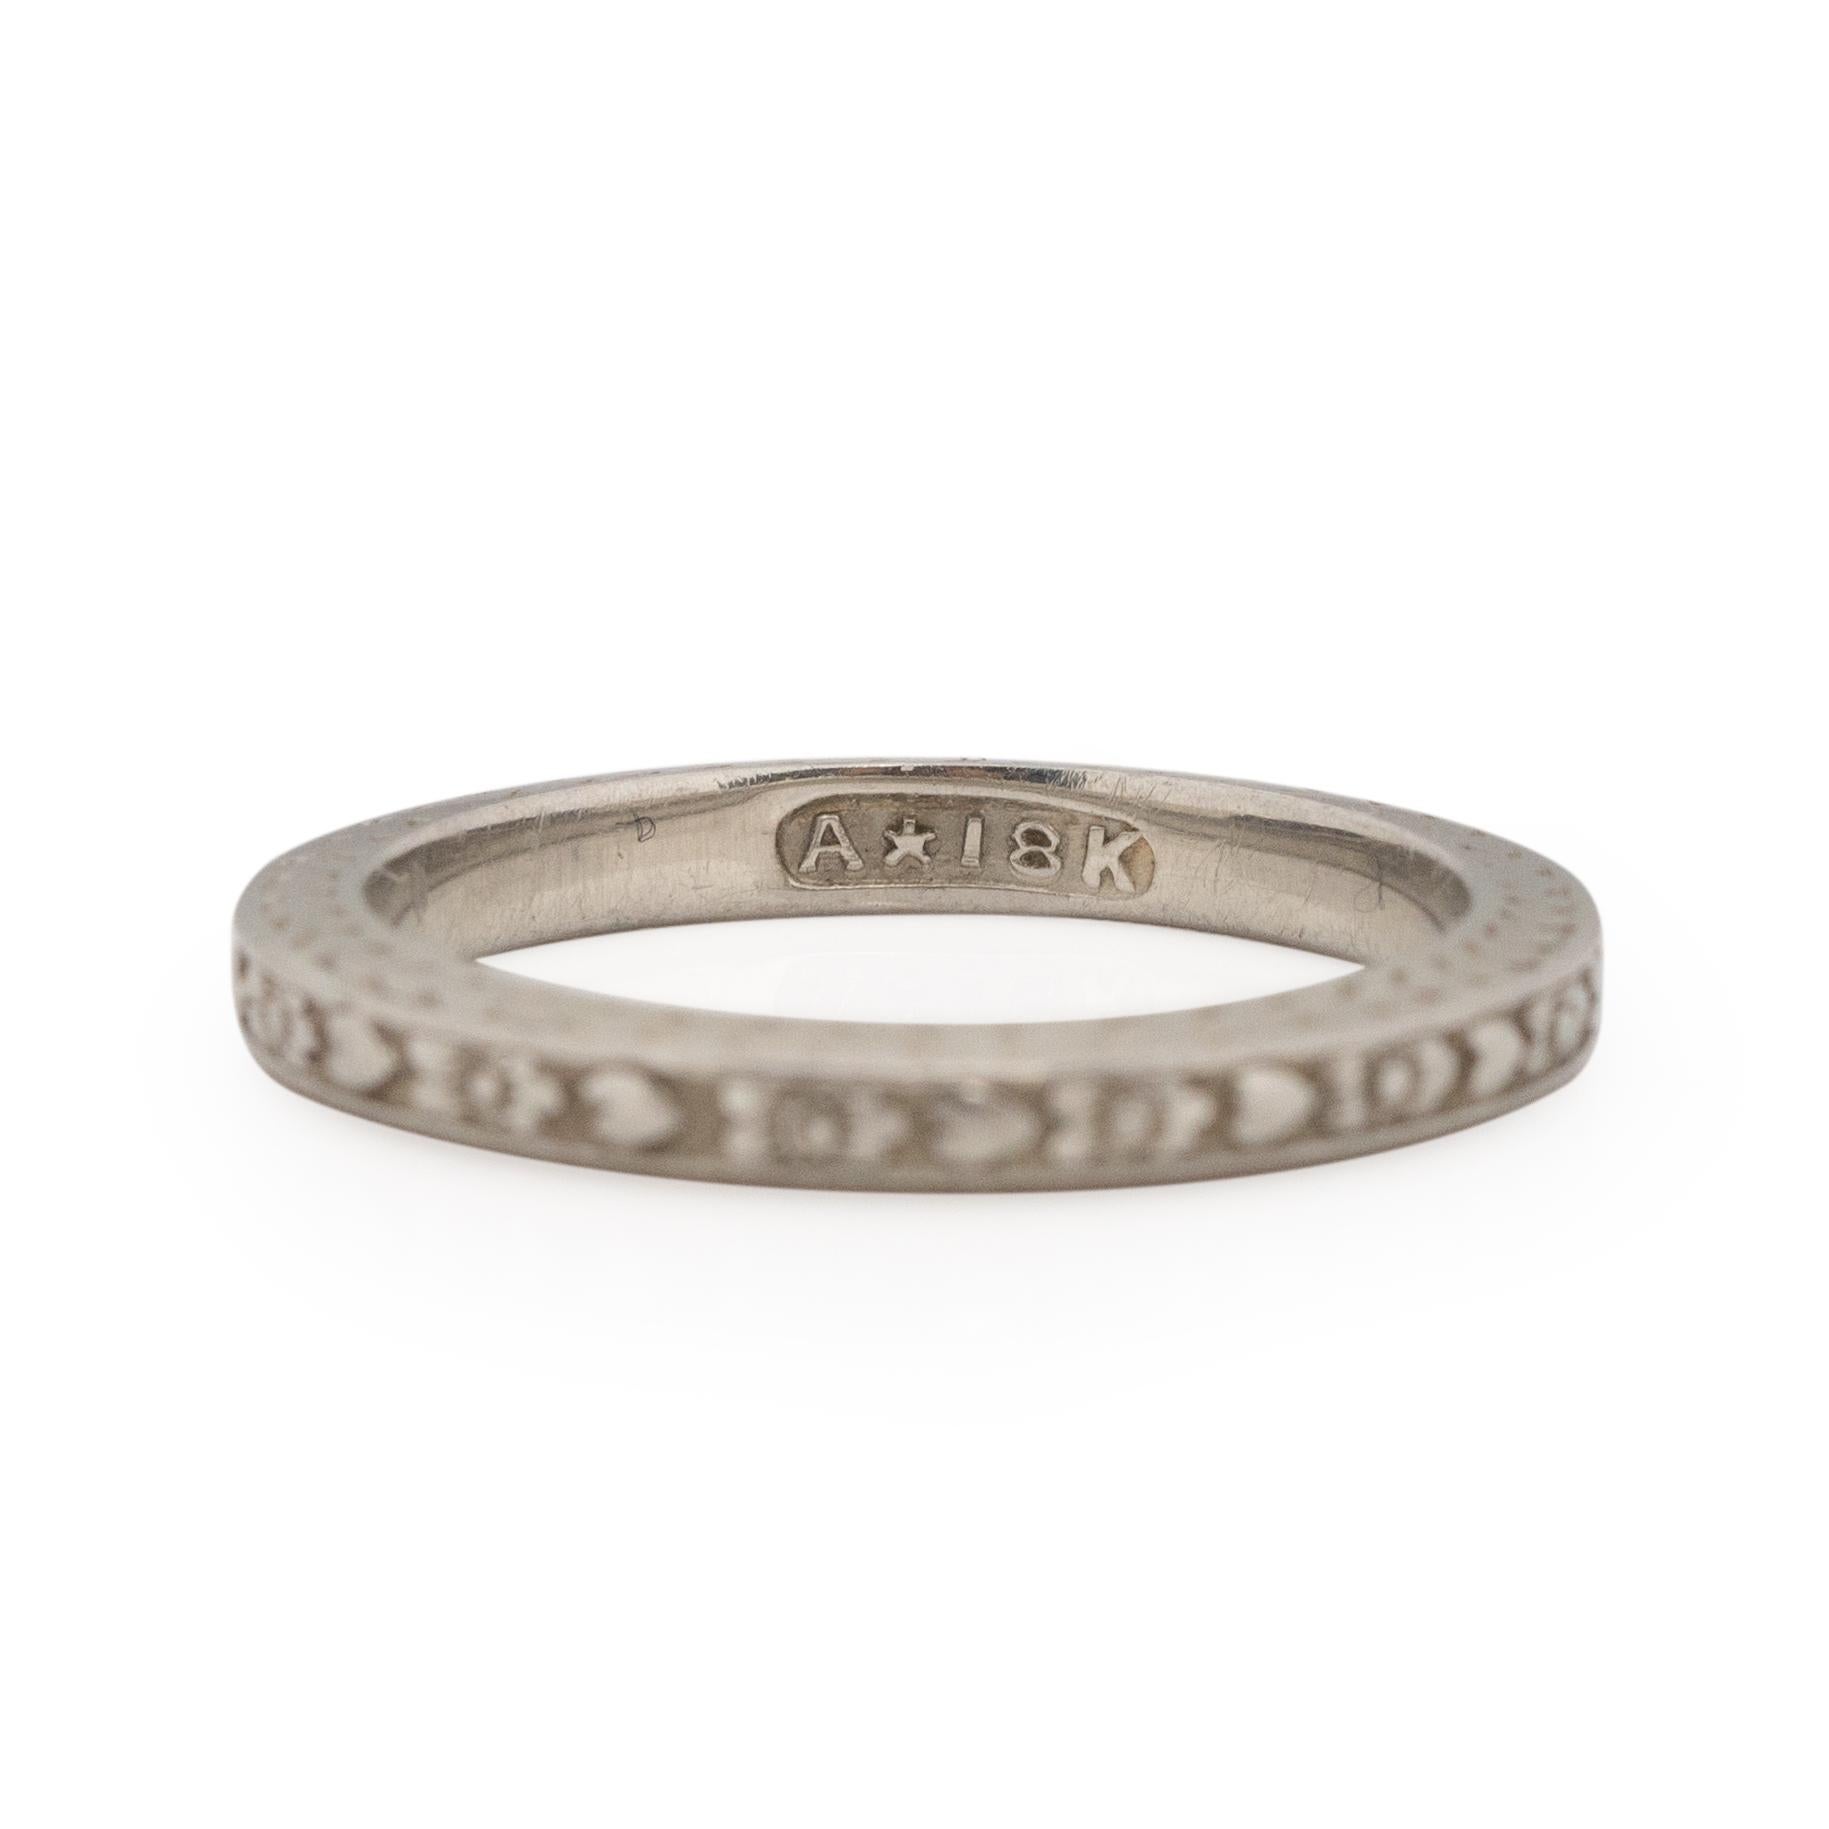 This piece is unique, fun and has a touch of whimsey. Crafted in 18K white gold this band has a beautiful heart and flower repeating pattern, that gives the overall piece a light feeling. The carved design is clean and deep, holding up to the test